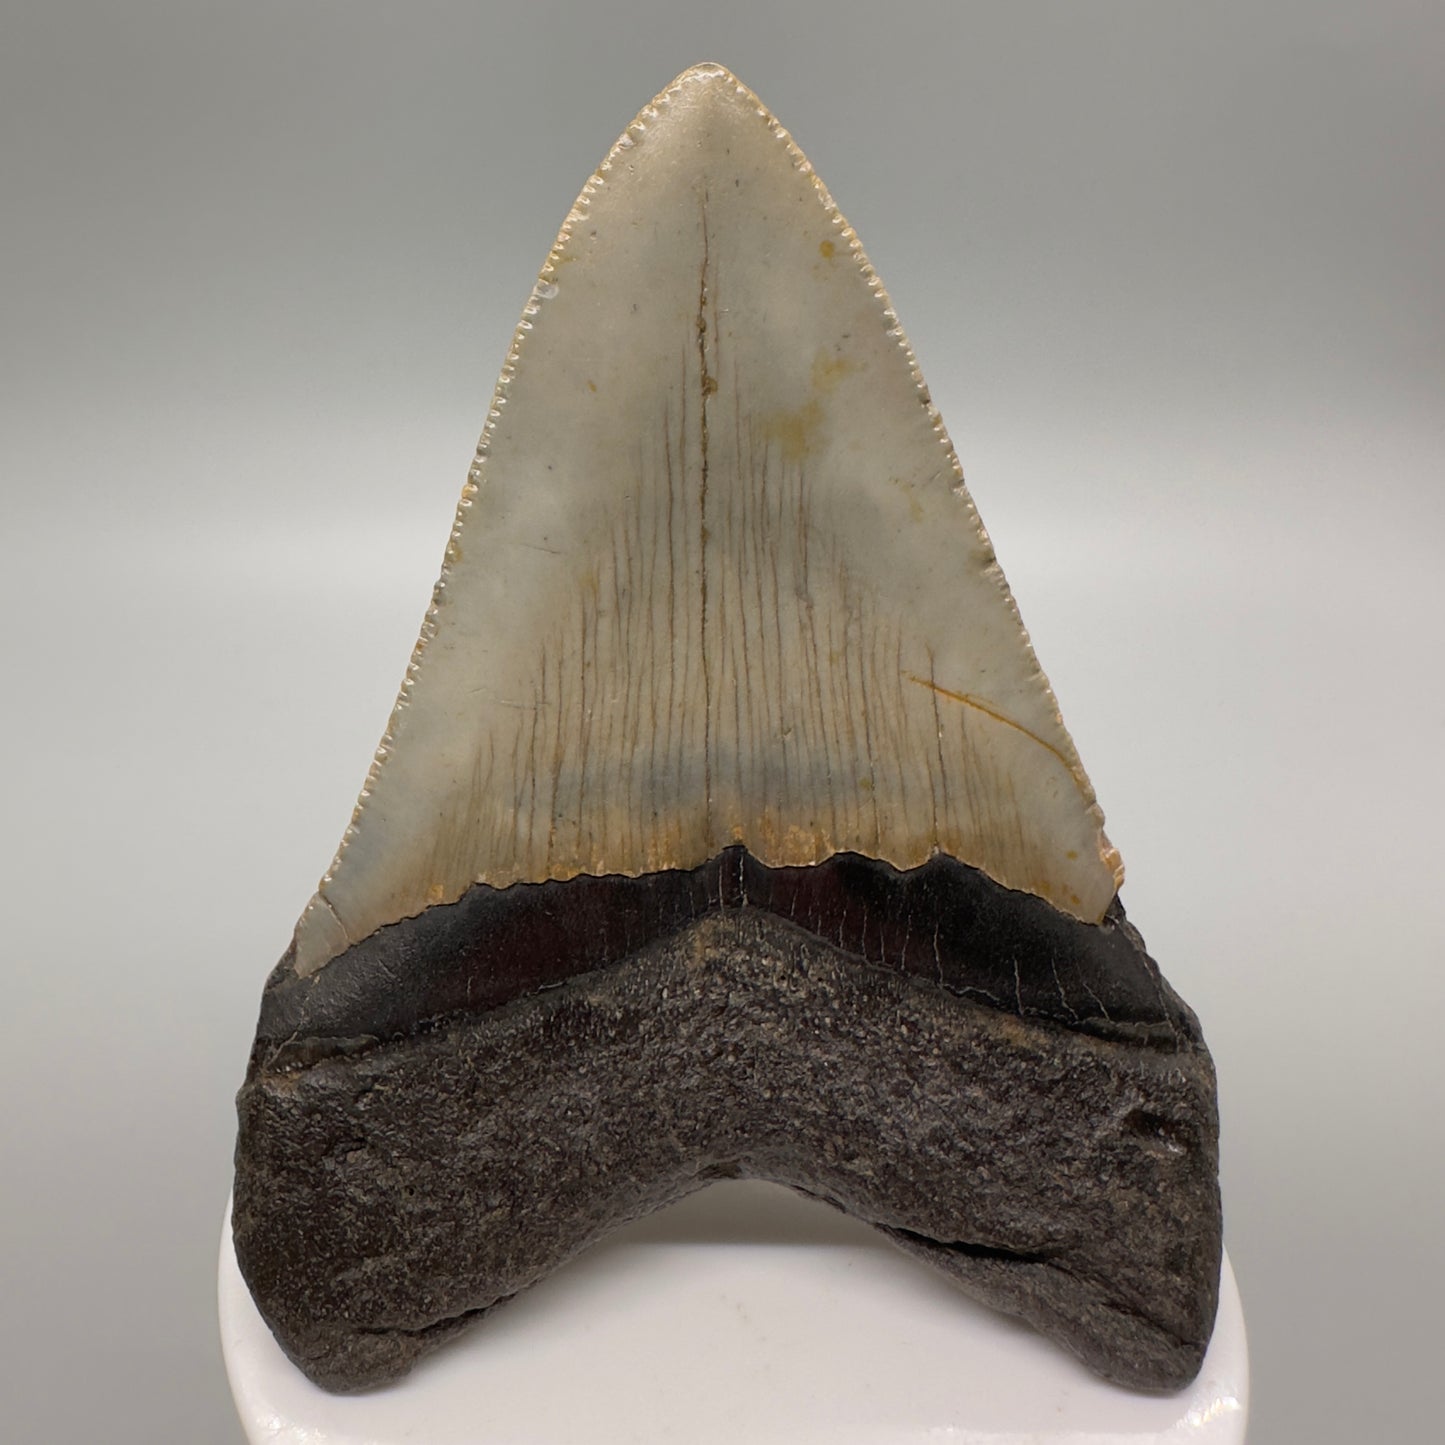 North Carolina Diving Discovery: Serrated 3.52" Fossil Megalodon Shark Tooth CM4615 - Back